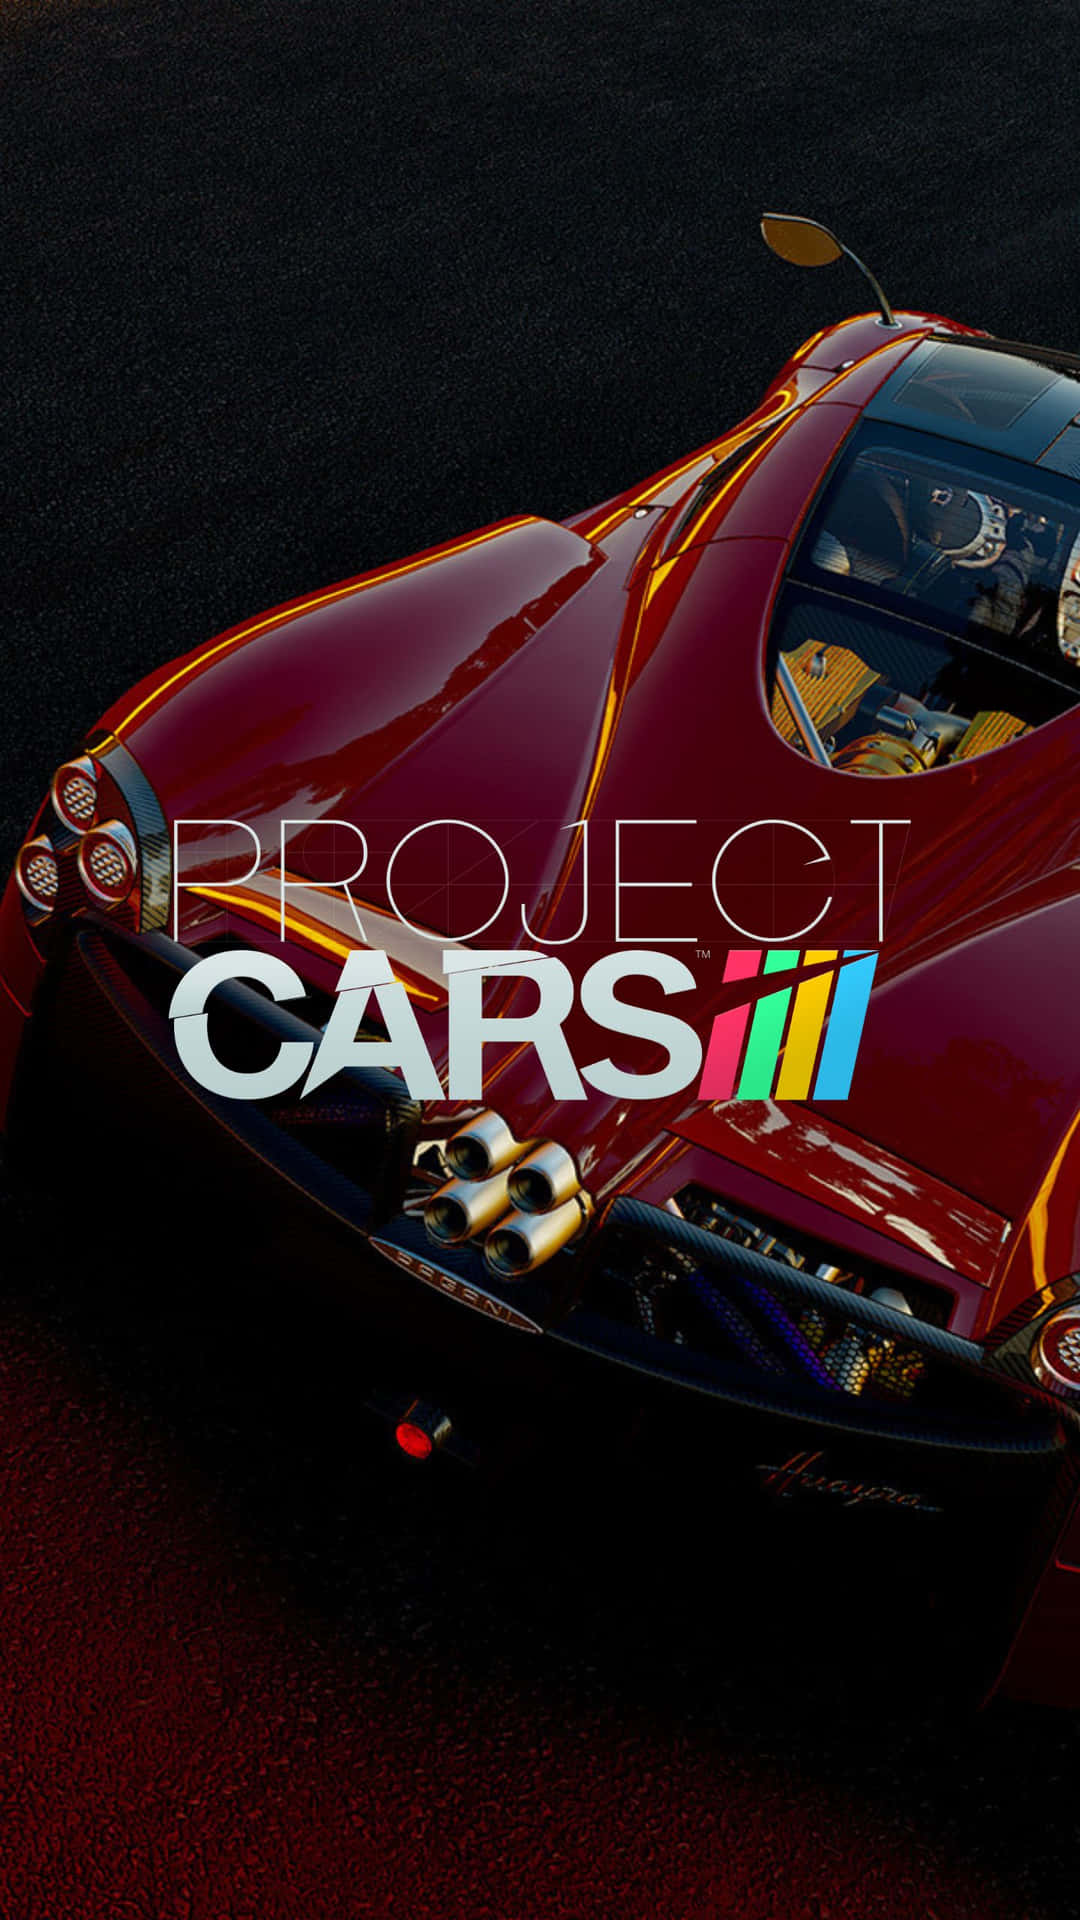 Proyectocars Iii - Pc - Pc - Pc - Pc - Pc